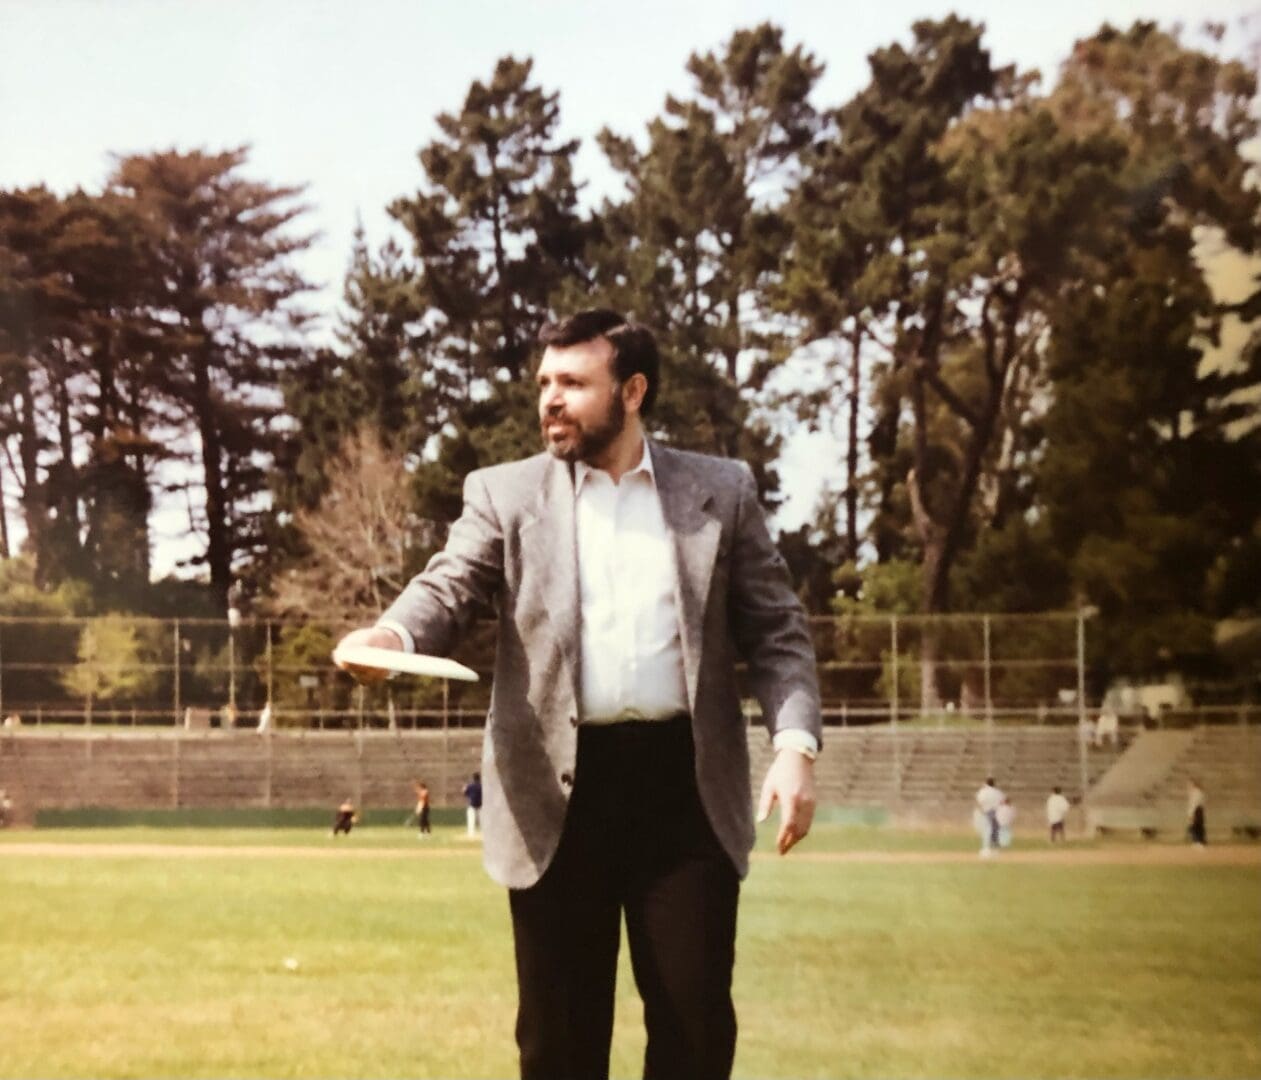 A man in a suit stands on the grass.